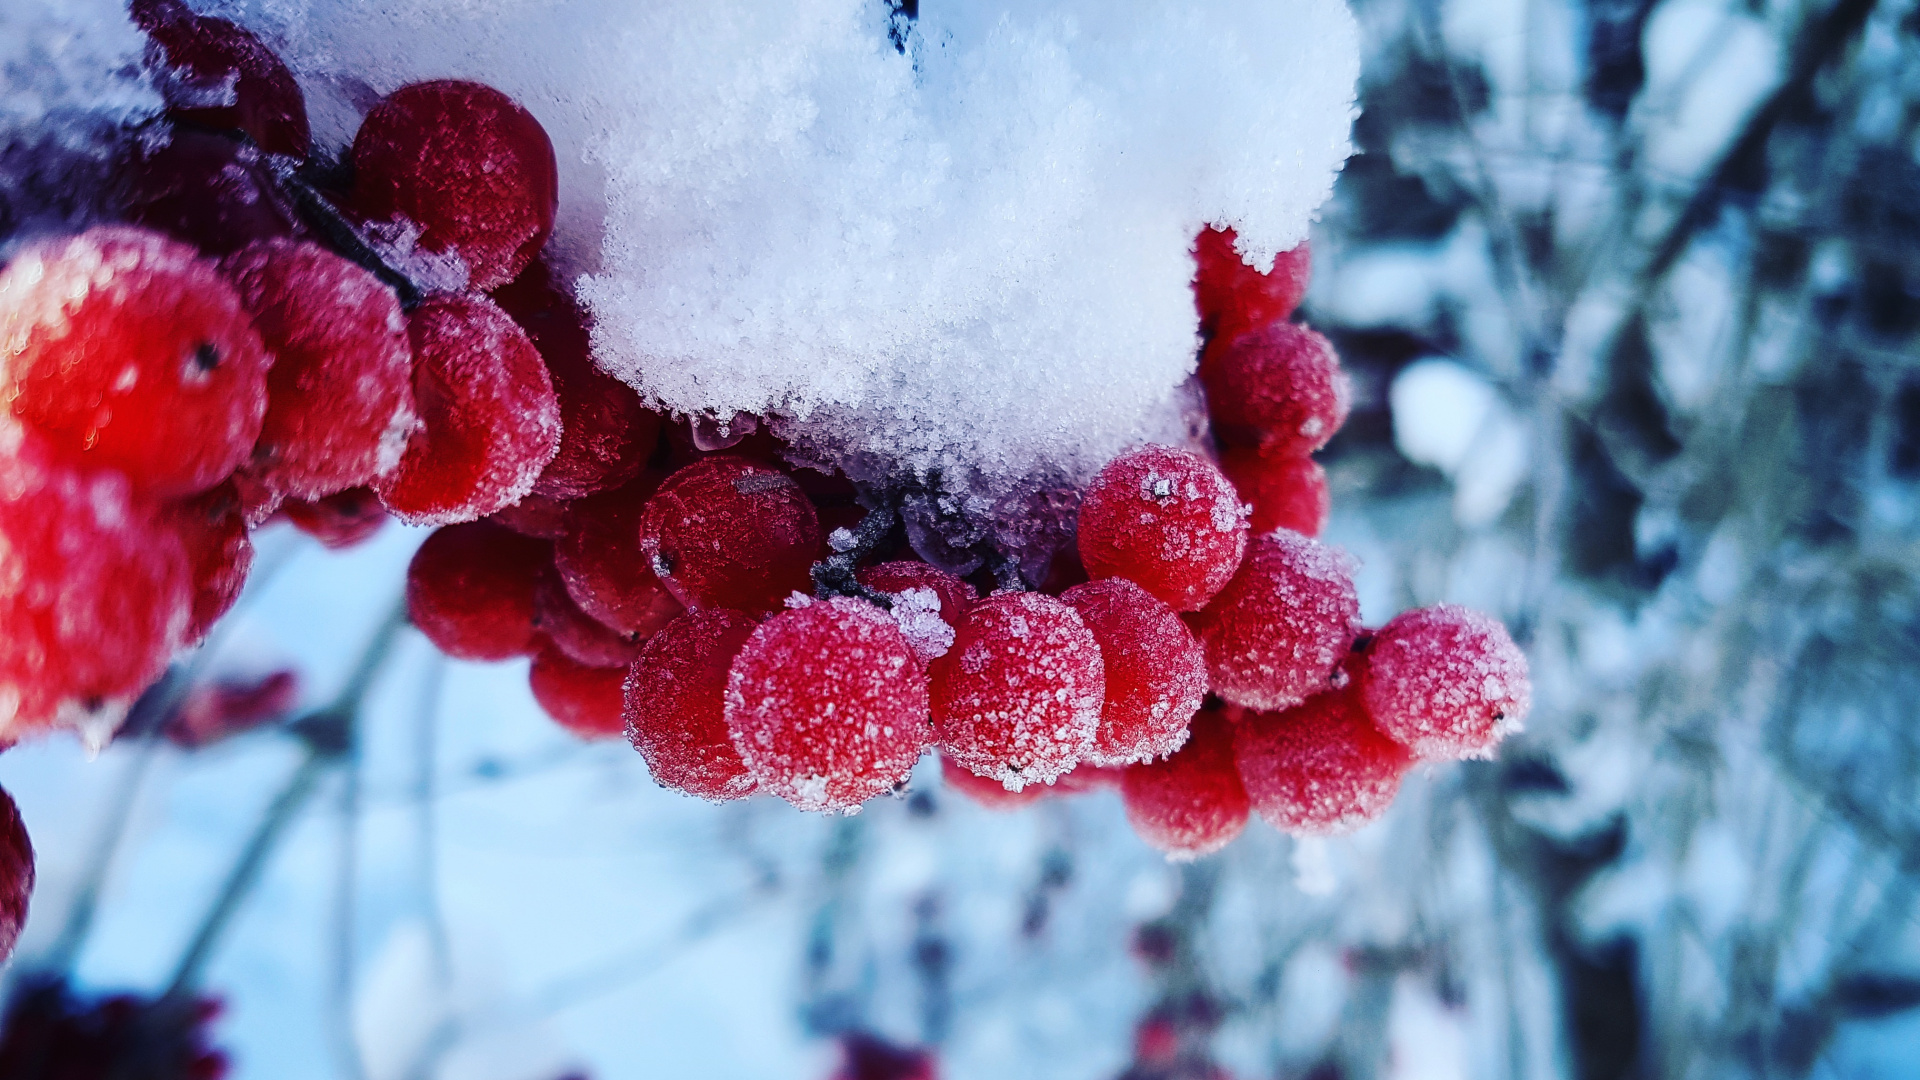 Fruits Ronds Rouges Recouverts de Neige. Wallpaper in 1920x1080 Resolution